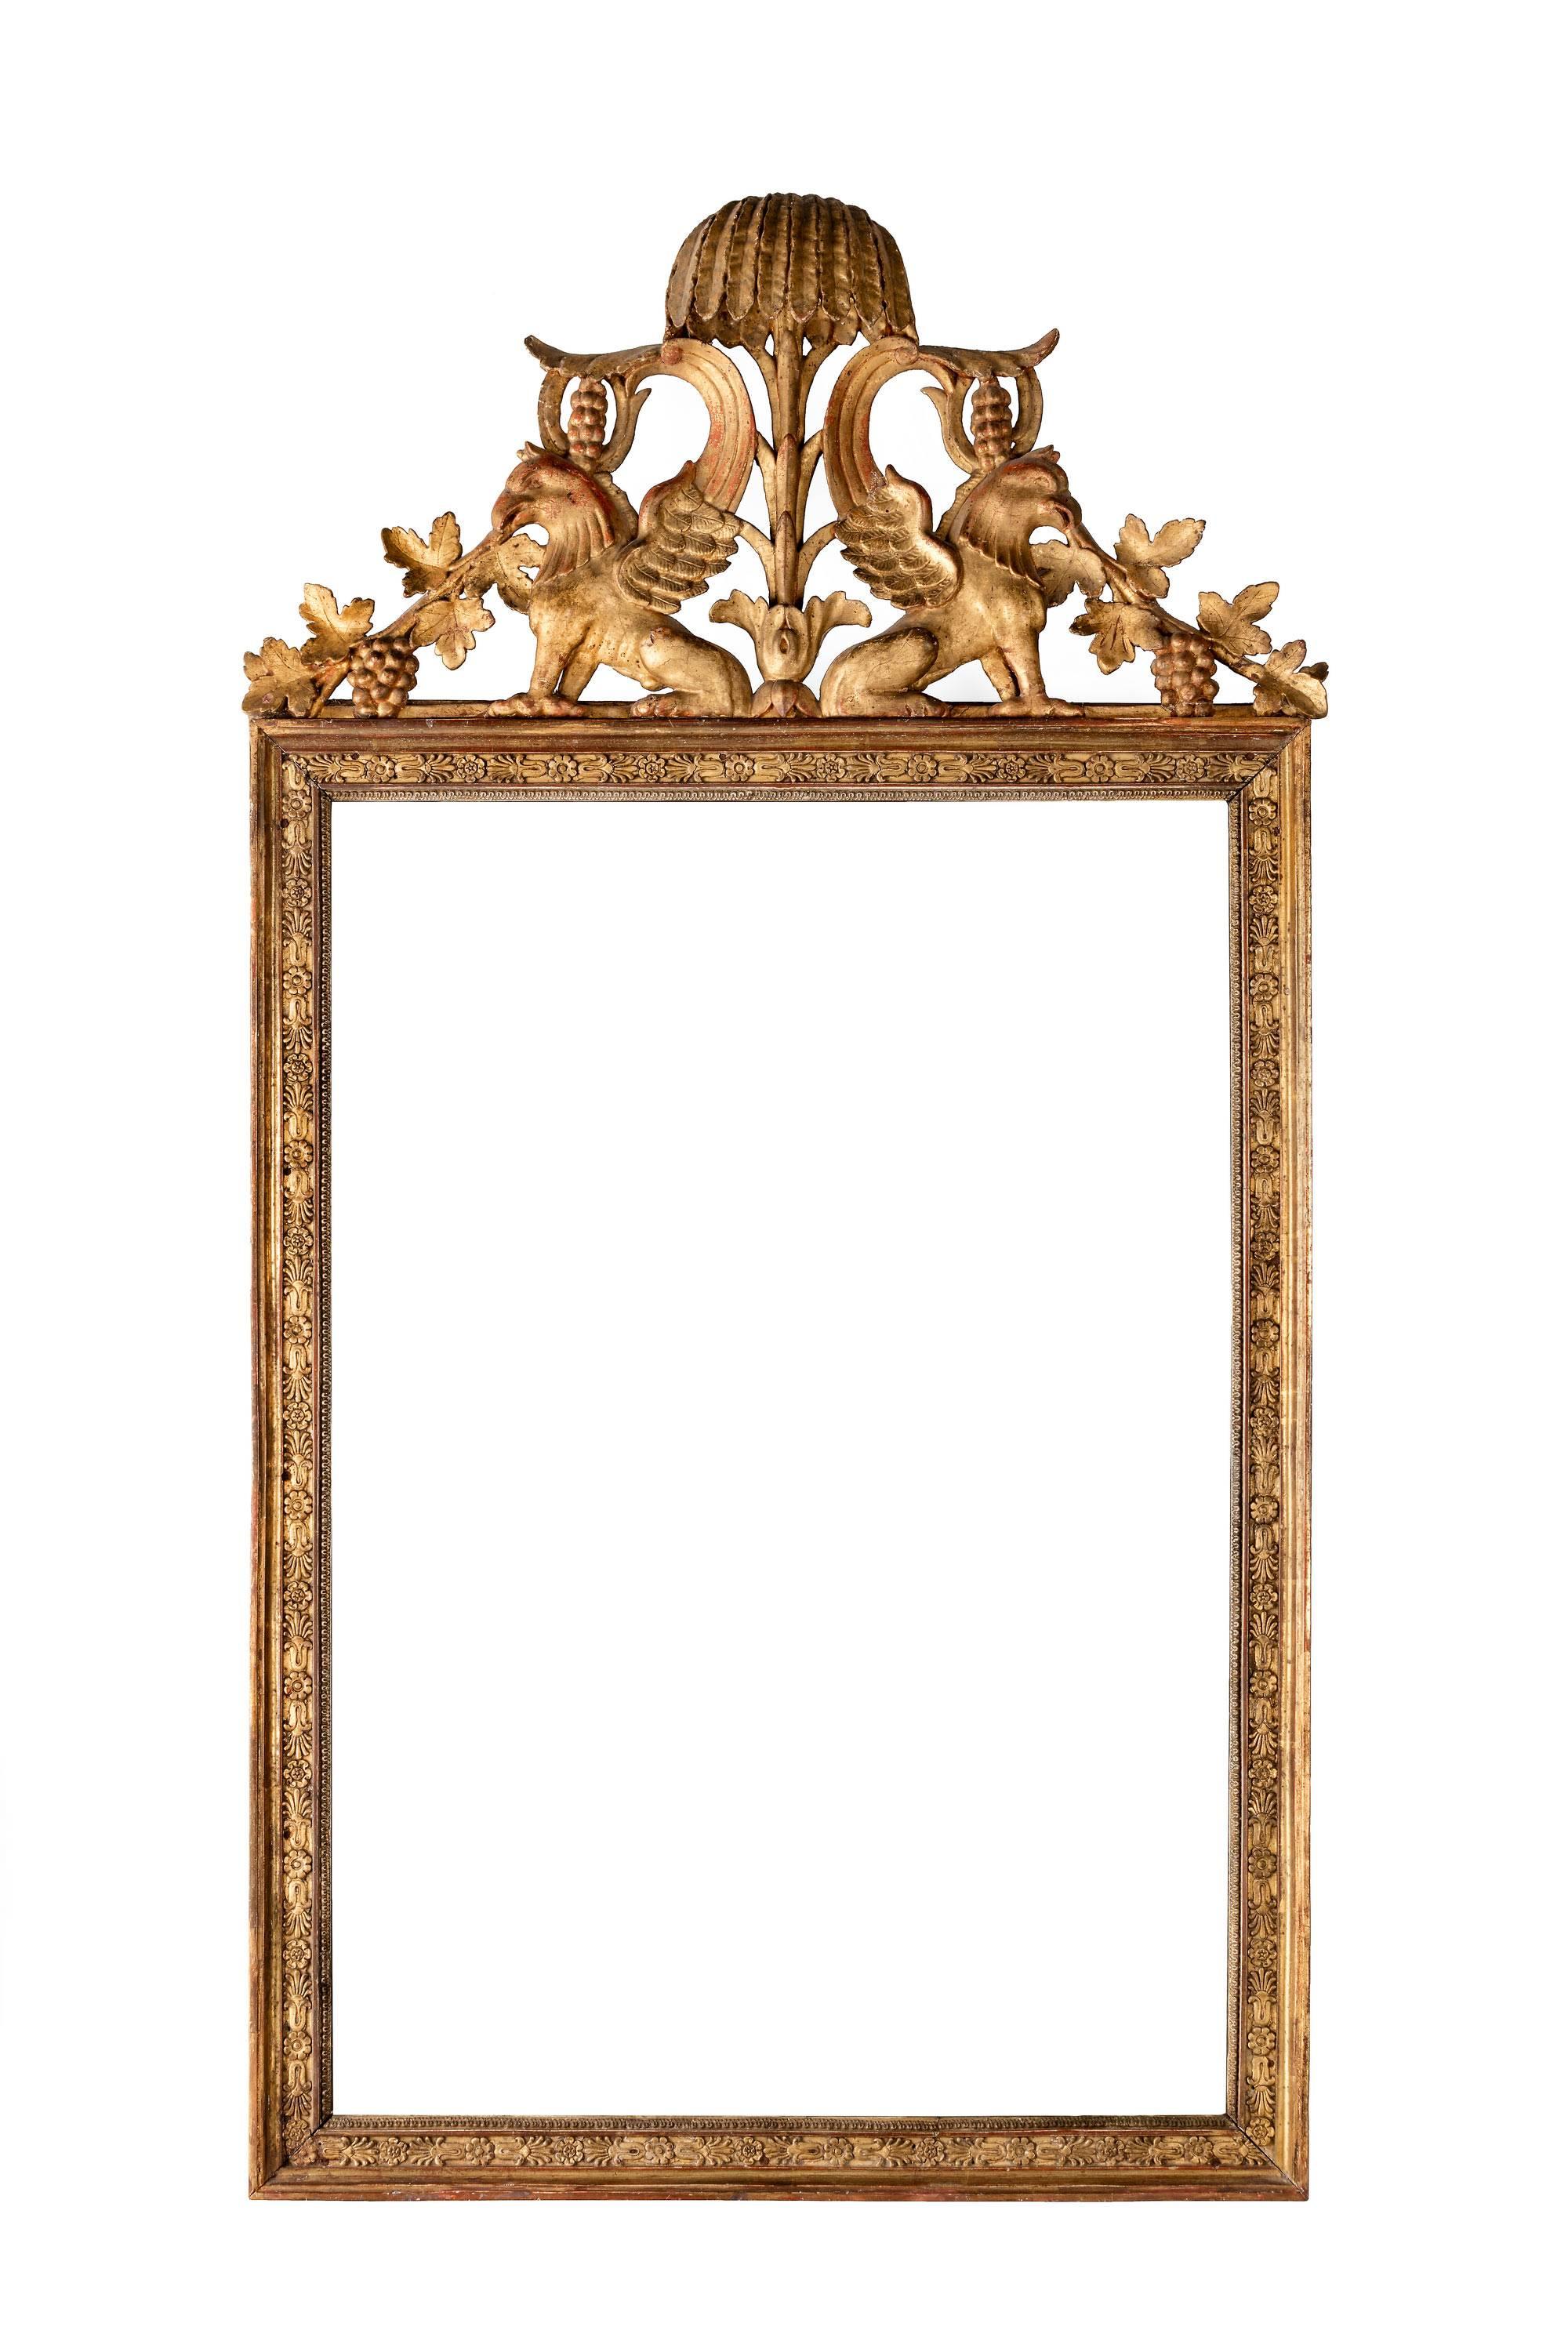 A most attractive Continental mid-18th century giltwood mirror. Inset carved border. The top with fabulous beasts within a stylized palm tree. Original gilding somewhat tired, and with a lovely original plate.